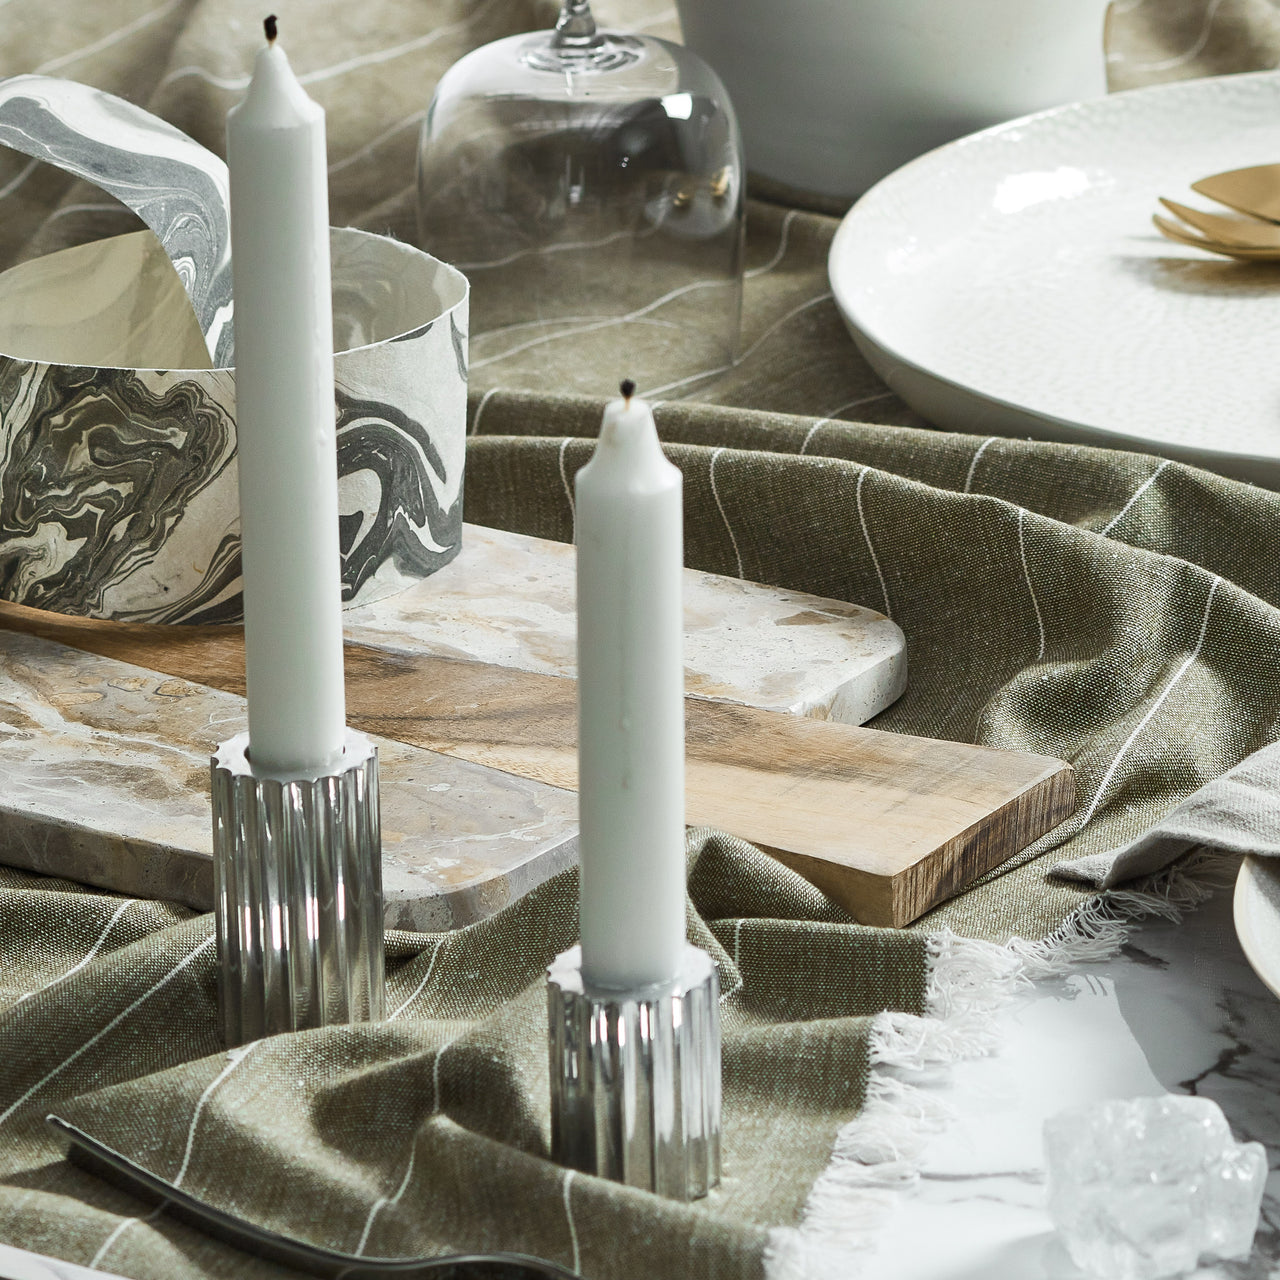 2 Piece Ribb Taper Candle Holder Set